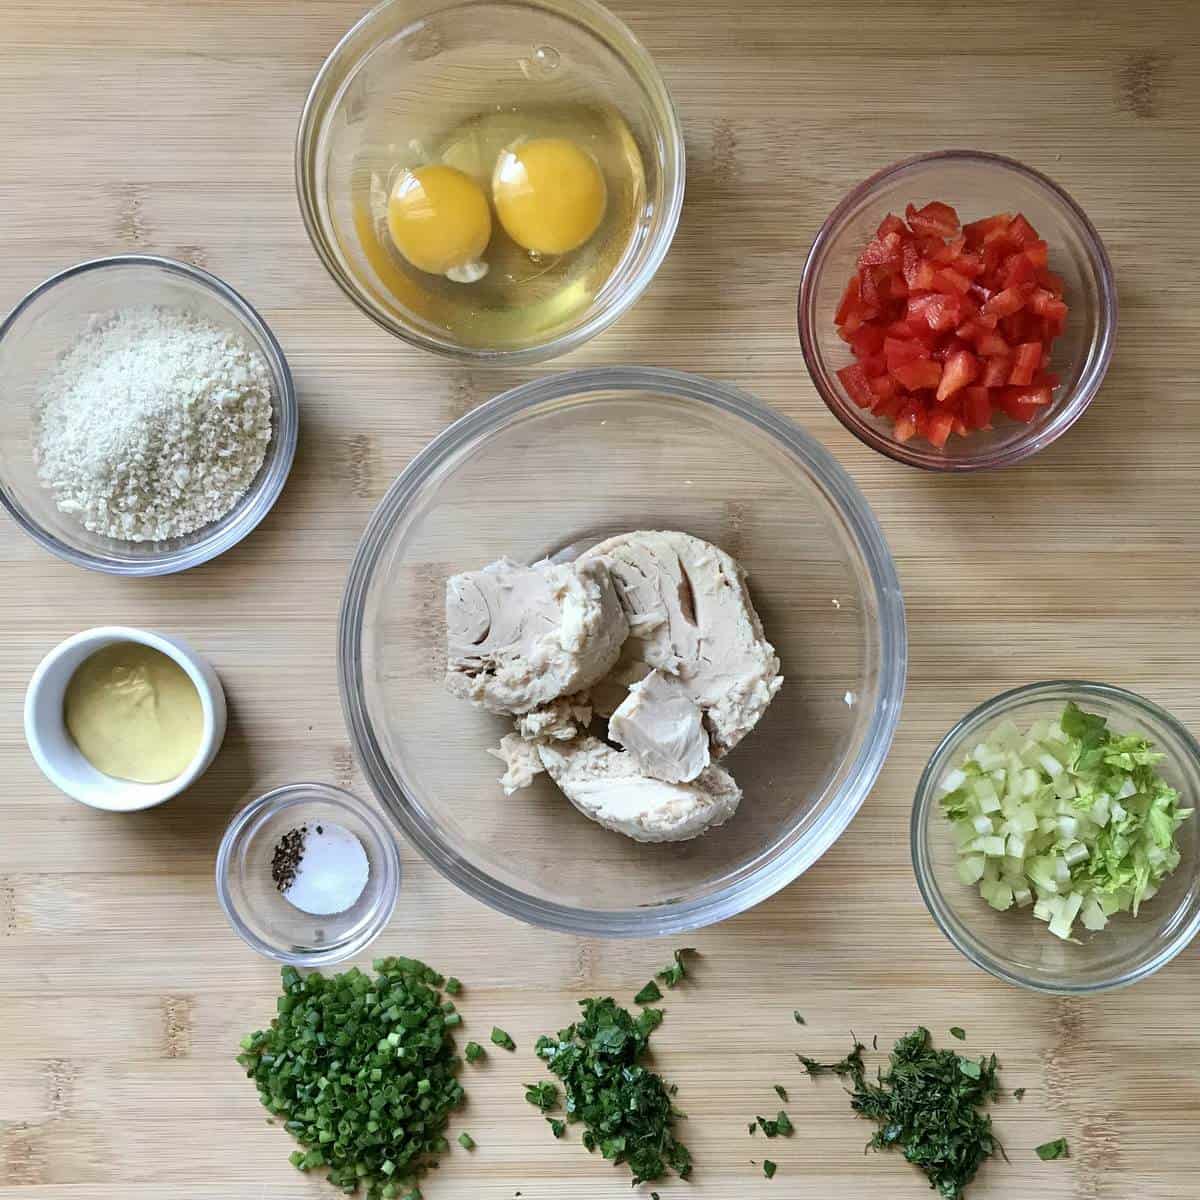 All the ingredients to make tuna croquettes are prepped on a wooden board.